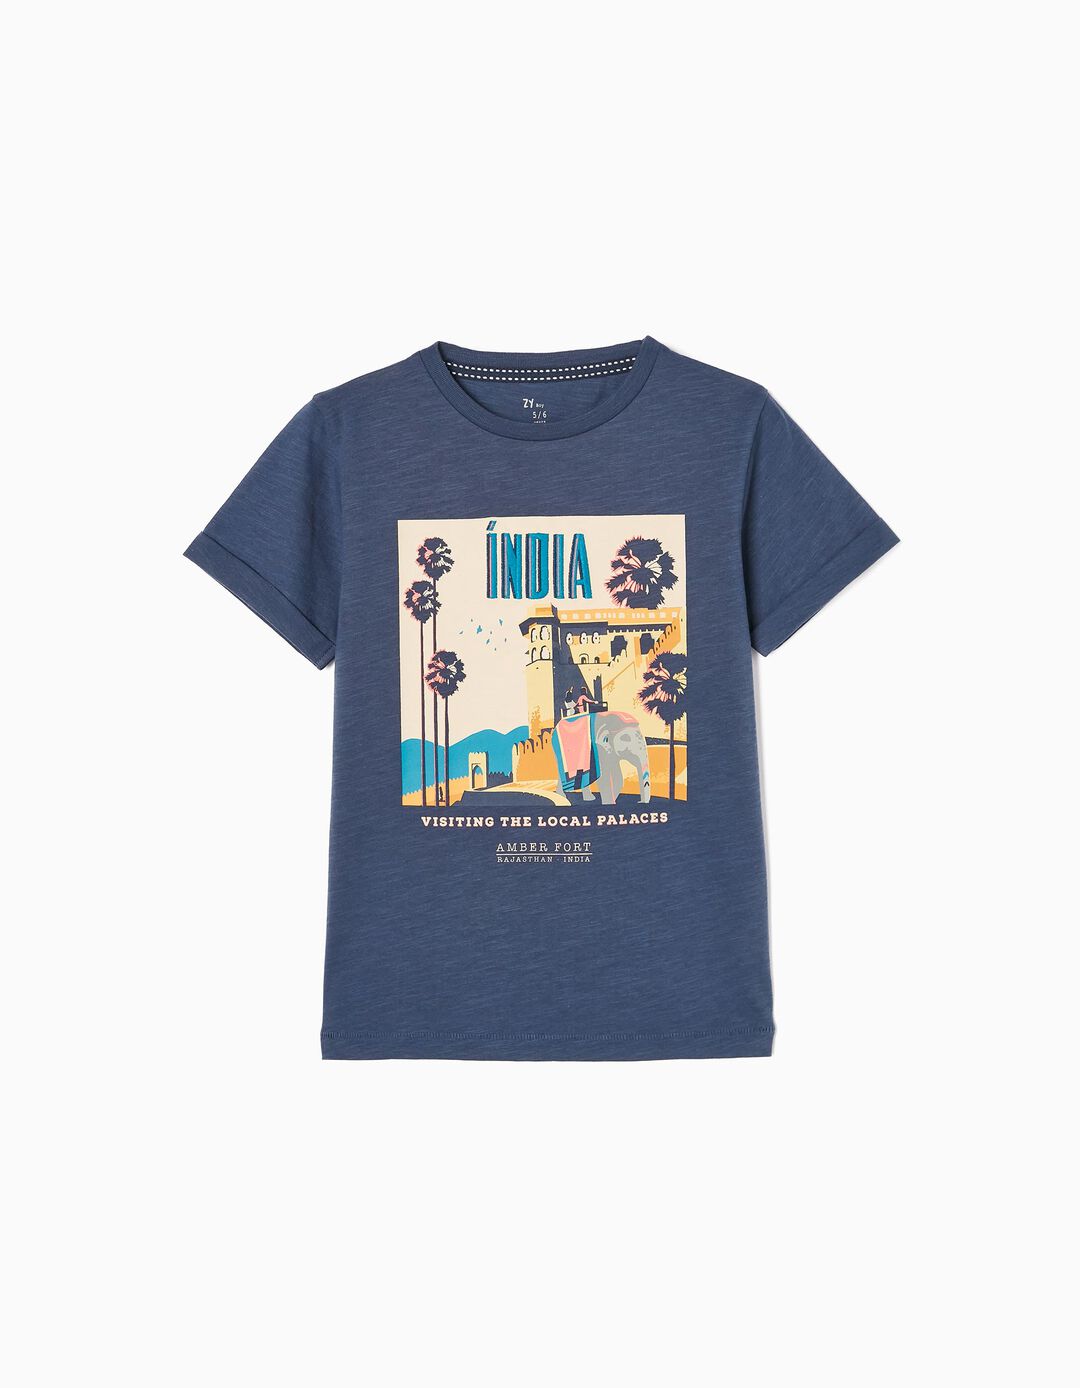 Cotton T-shirt for Boys 'India', Blue